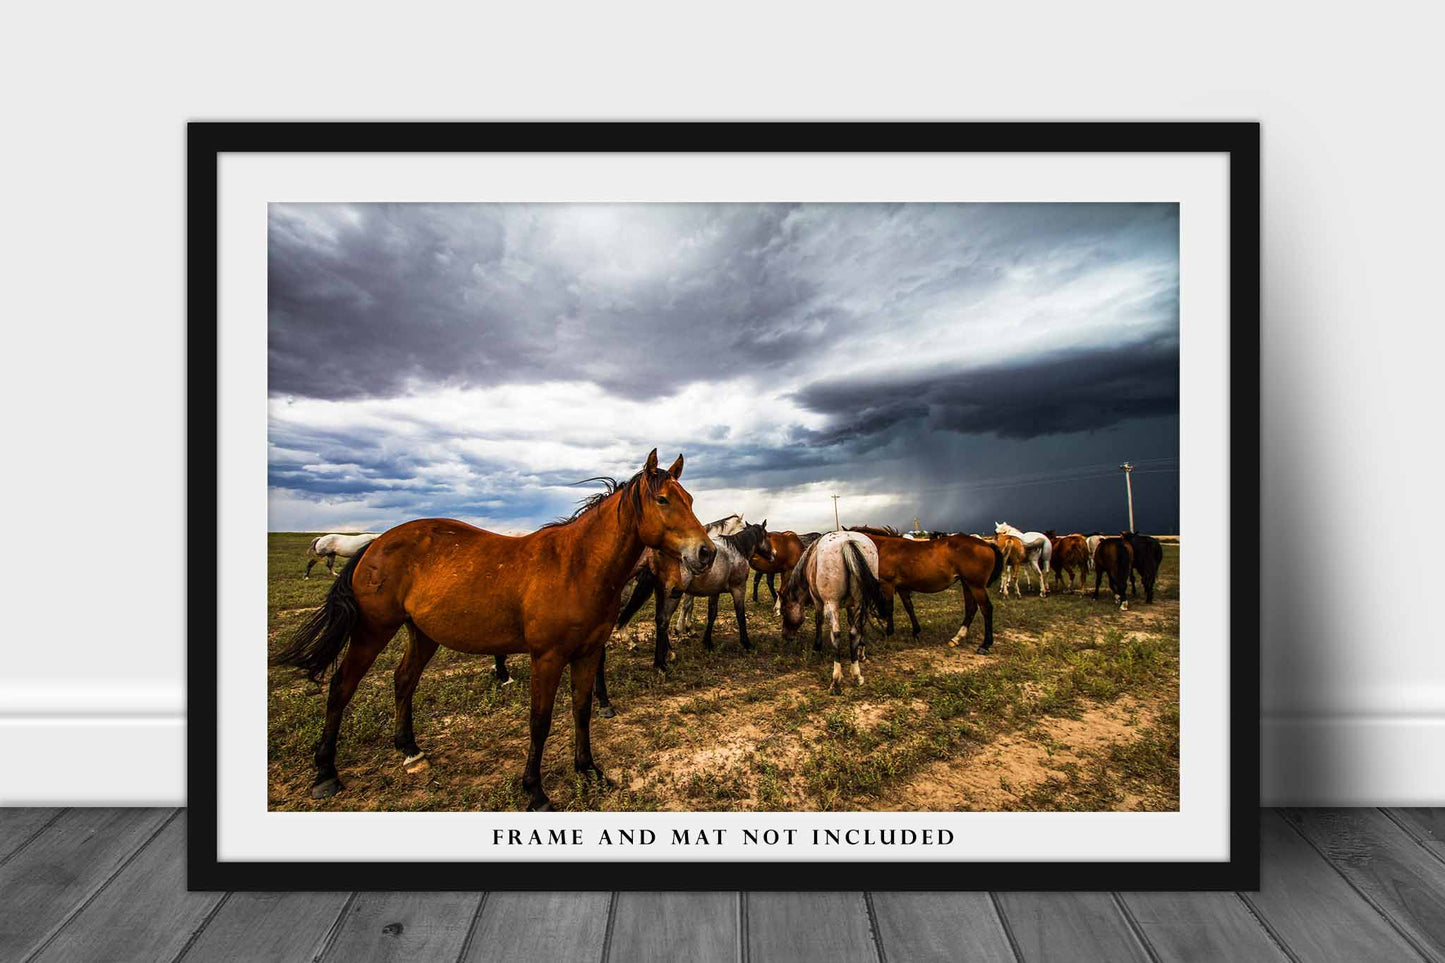 Horse Photography Print | Equine Picture | Farm and Ranch Wall Art | Oklahoma Photo | Western Decor | Not Framed